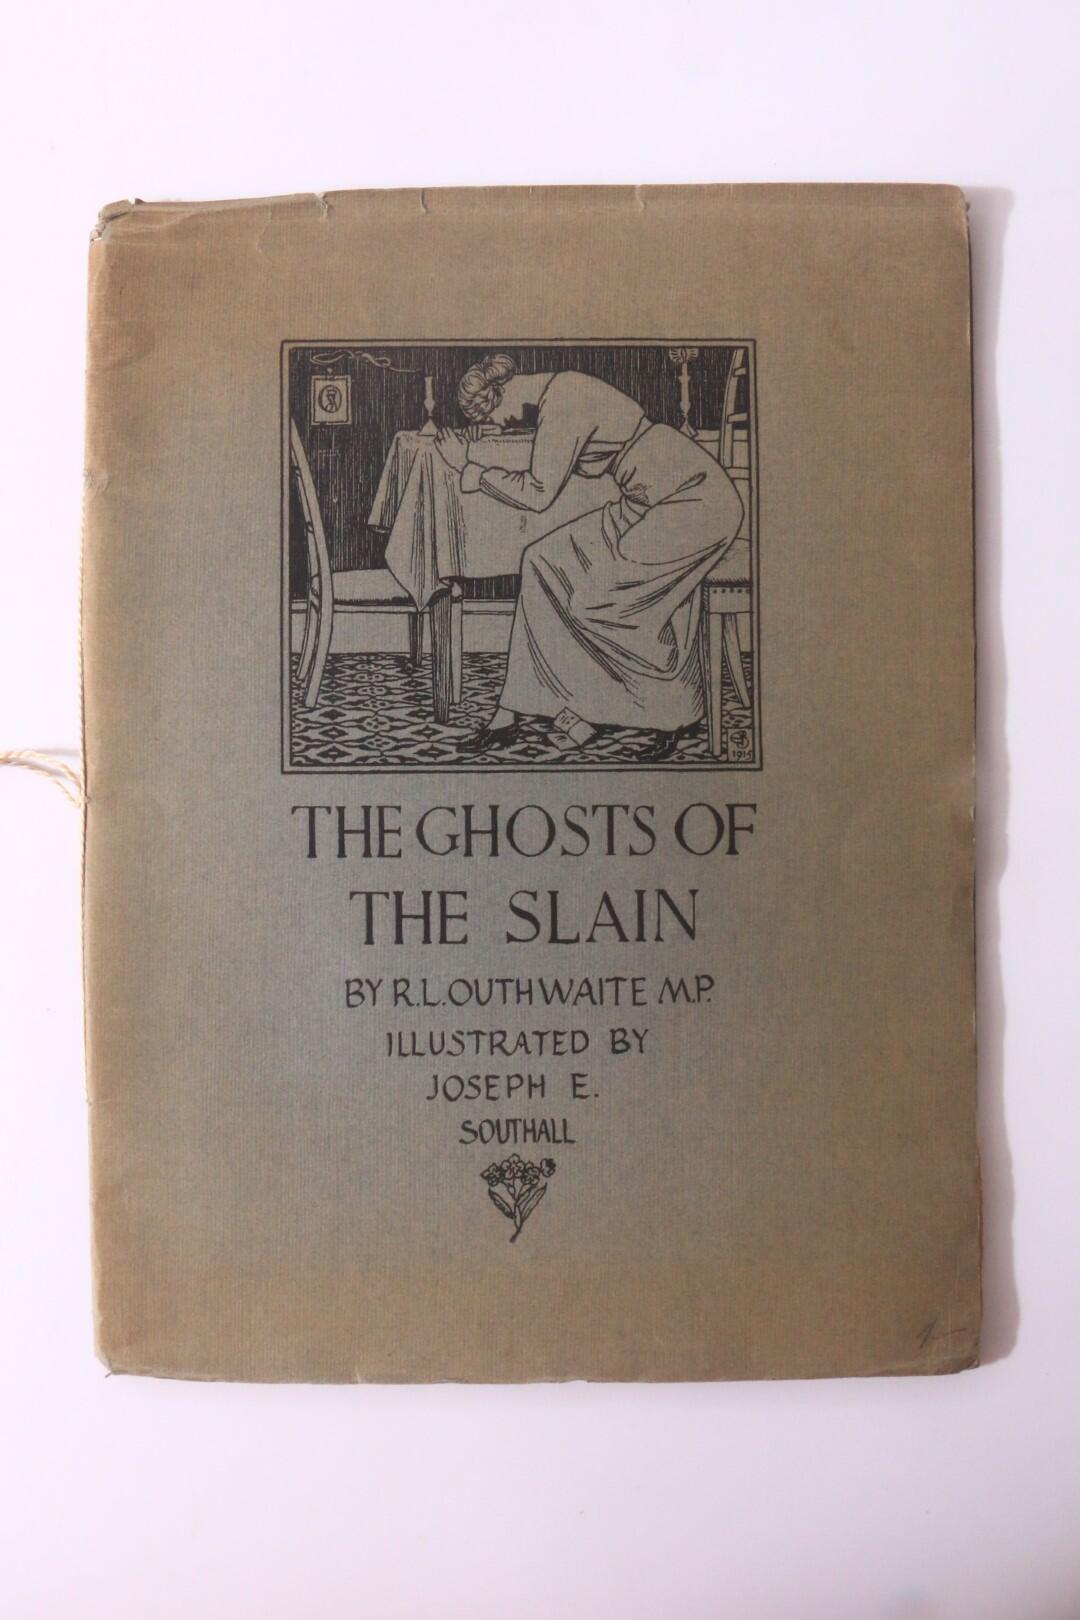 R.L. Outhwaite - The Ghosts of the Slain - The National Labour Press, n.d. [1915], First Edition.